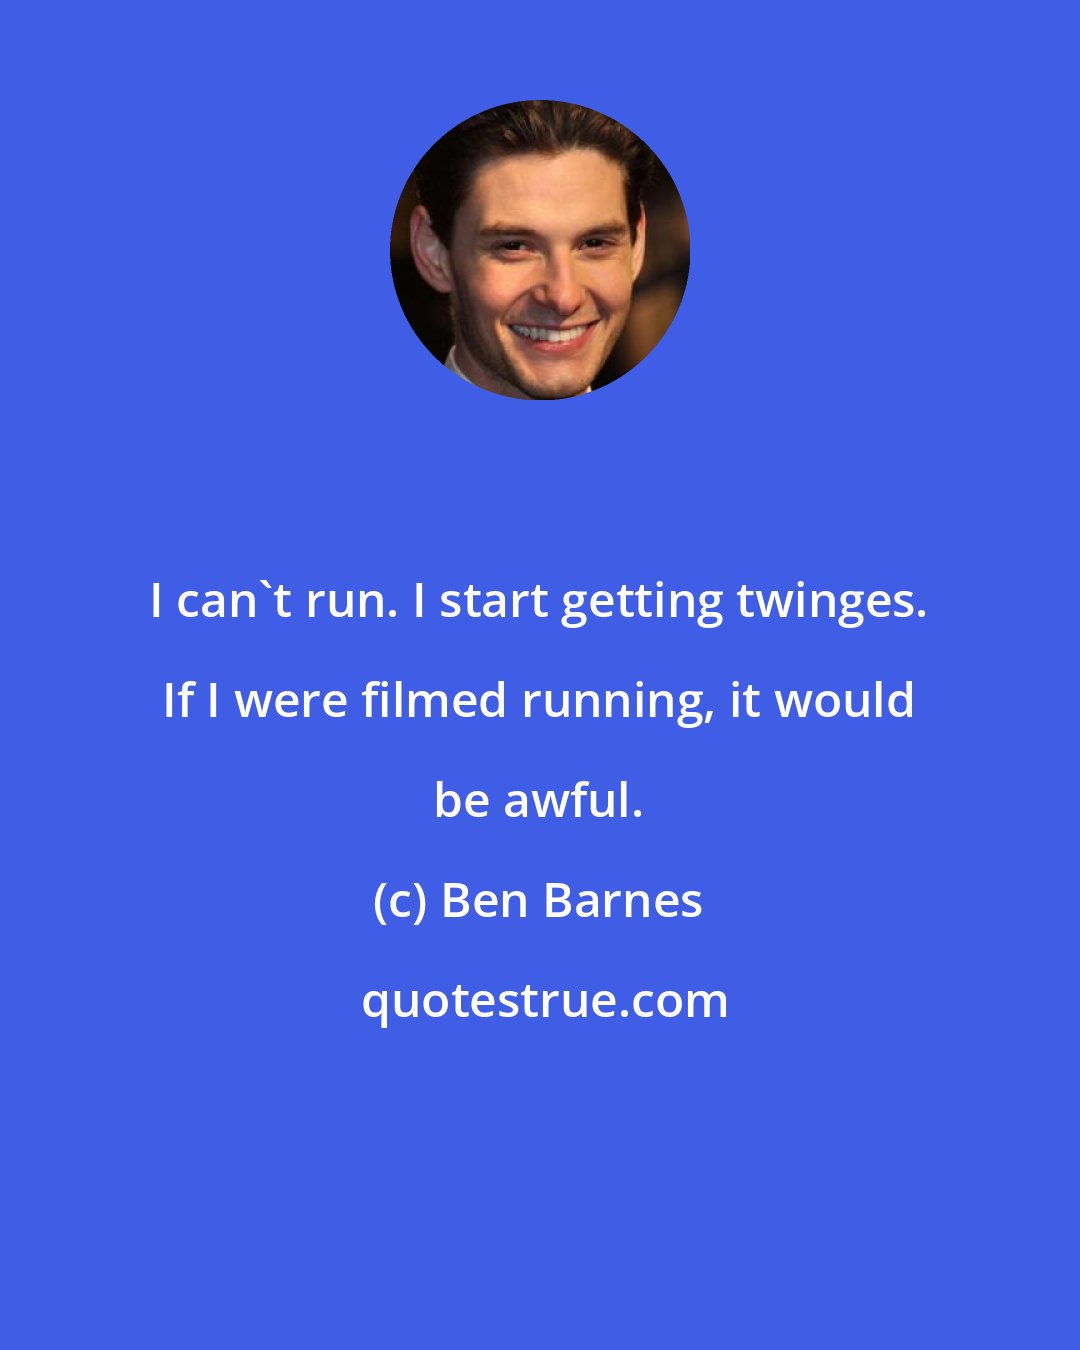 Ben Barnes: I can't run. I start getting twinges. If I were filmed running, it would be awful.